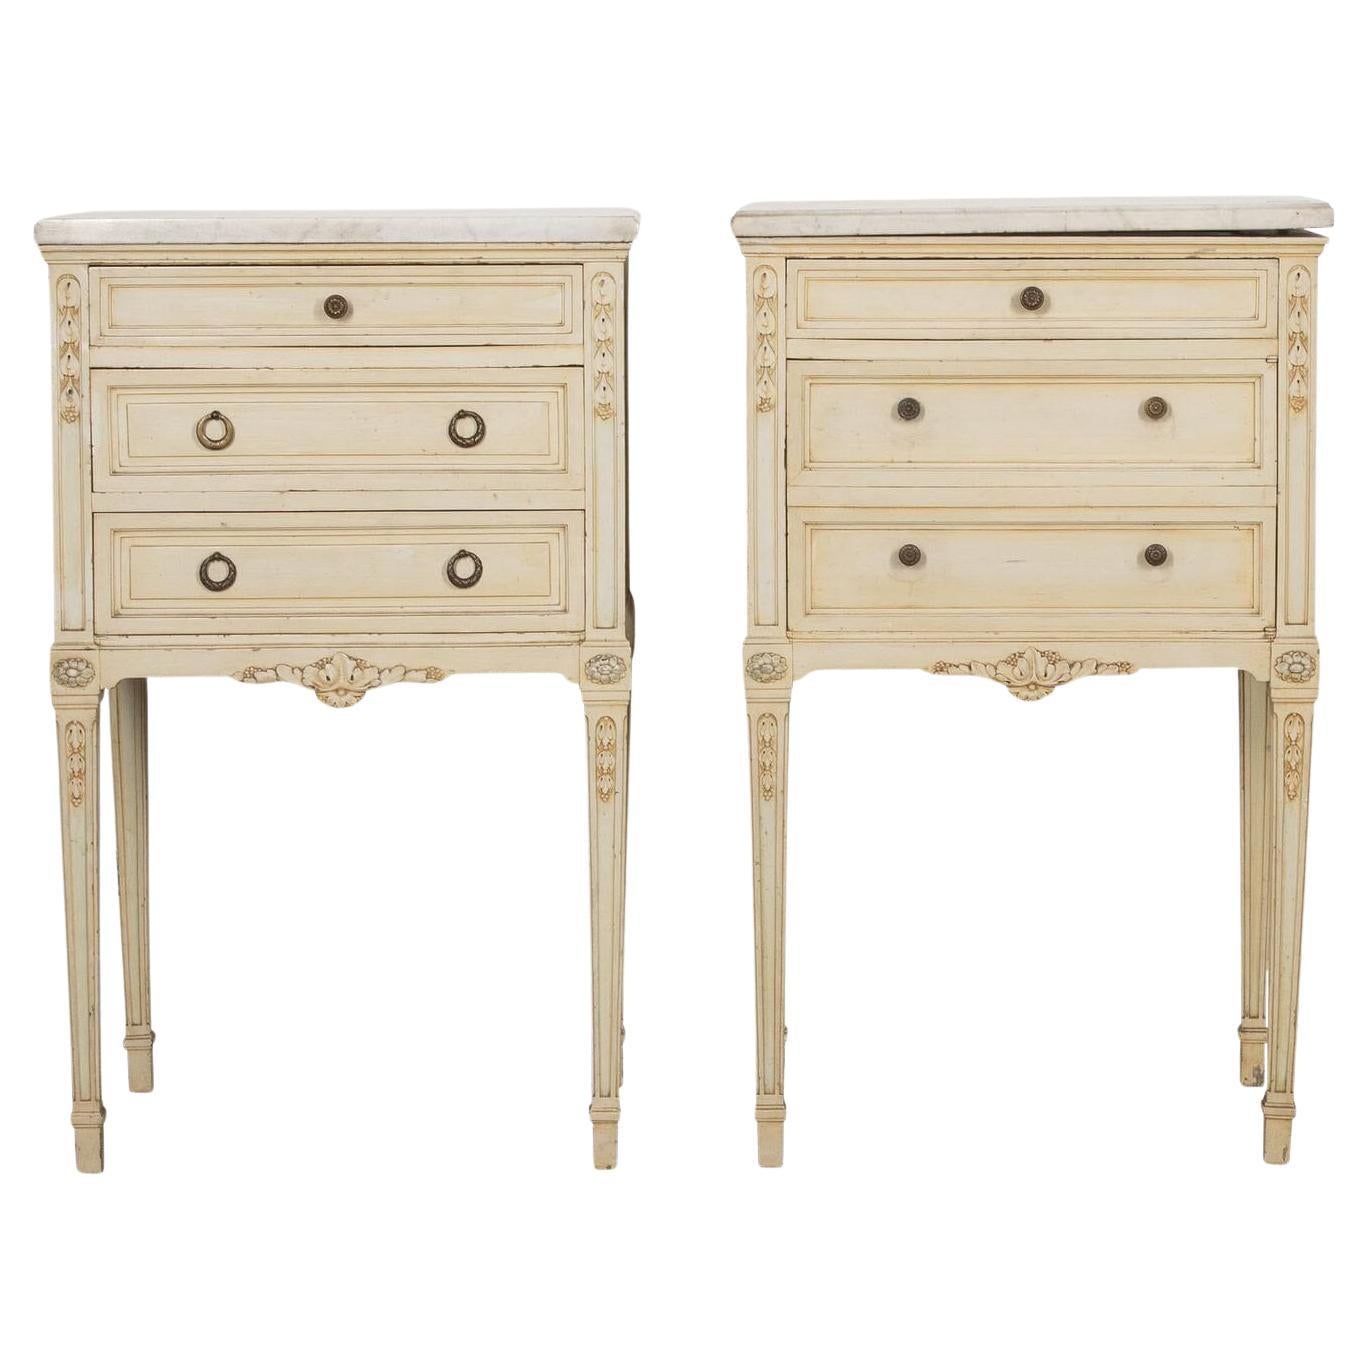 Pair of 19th Century French Bedside Cabinet